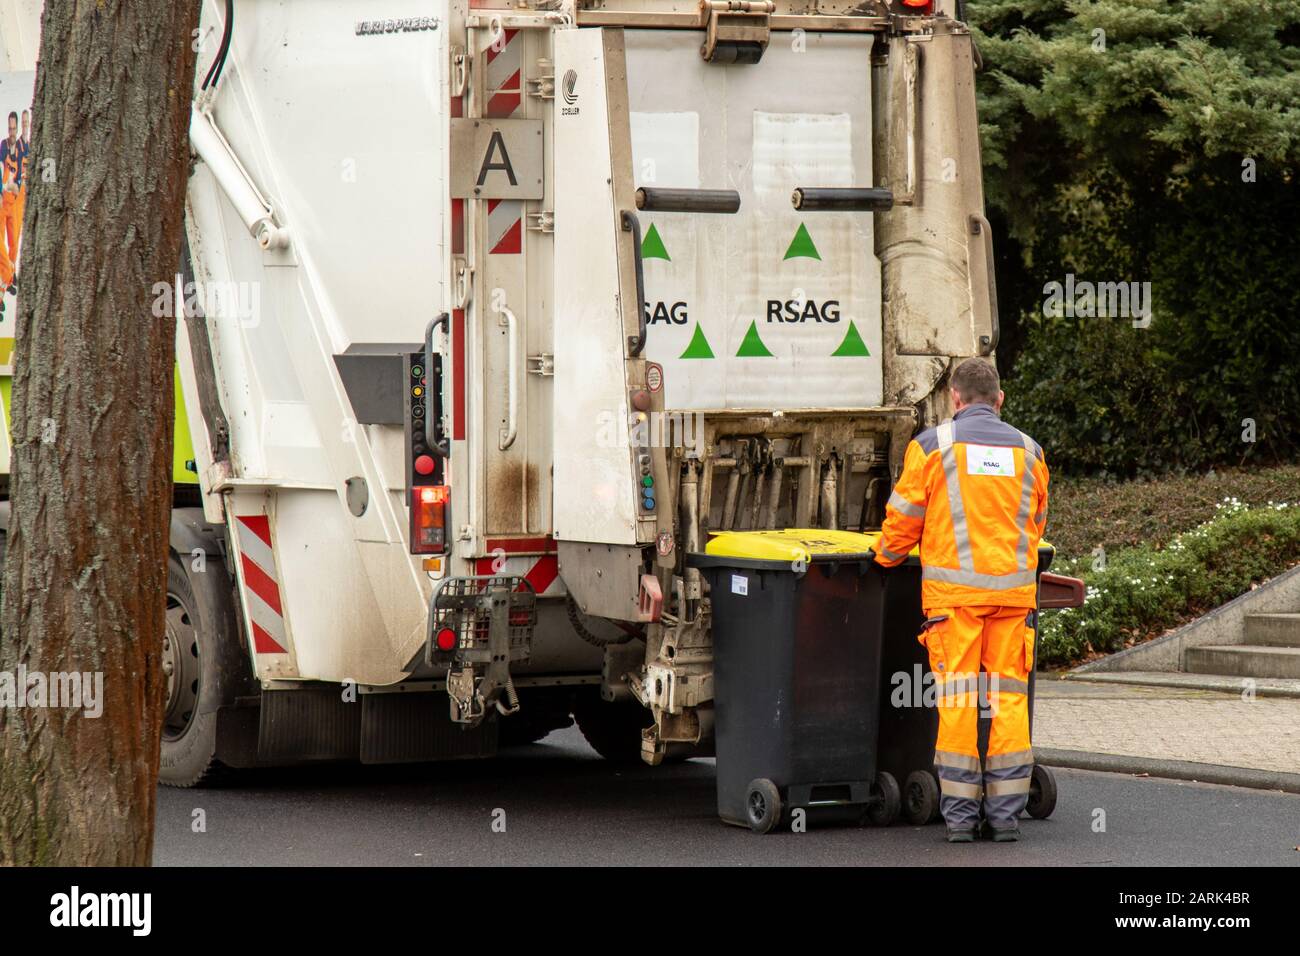 garbage truck and ladder emptying garbage cans, Meckenheim NRW Germany - 27 01 2020 Stock Photo